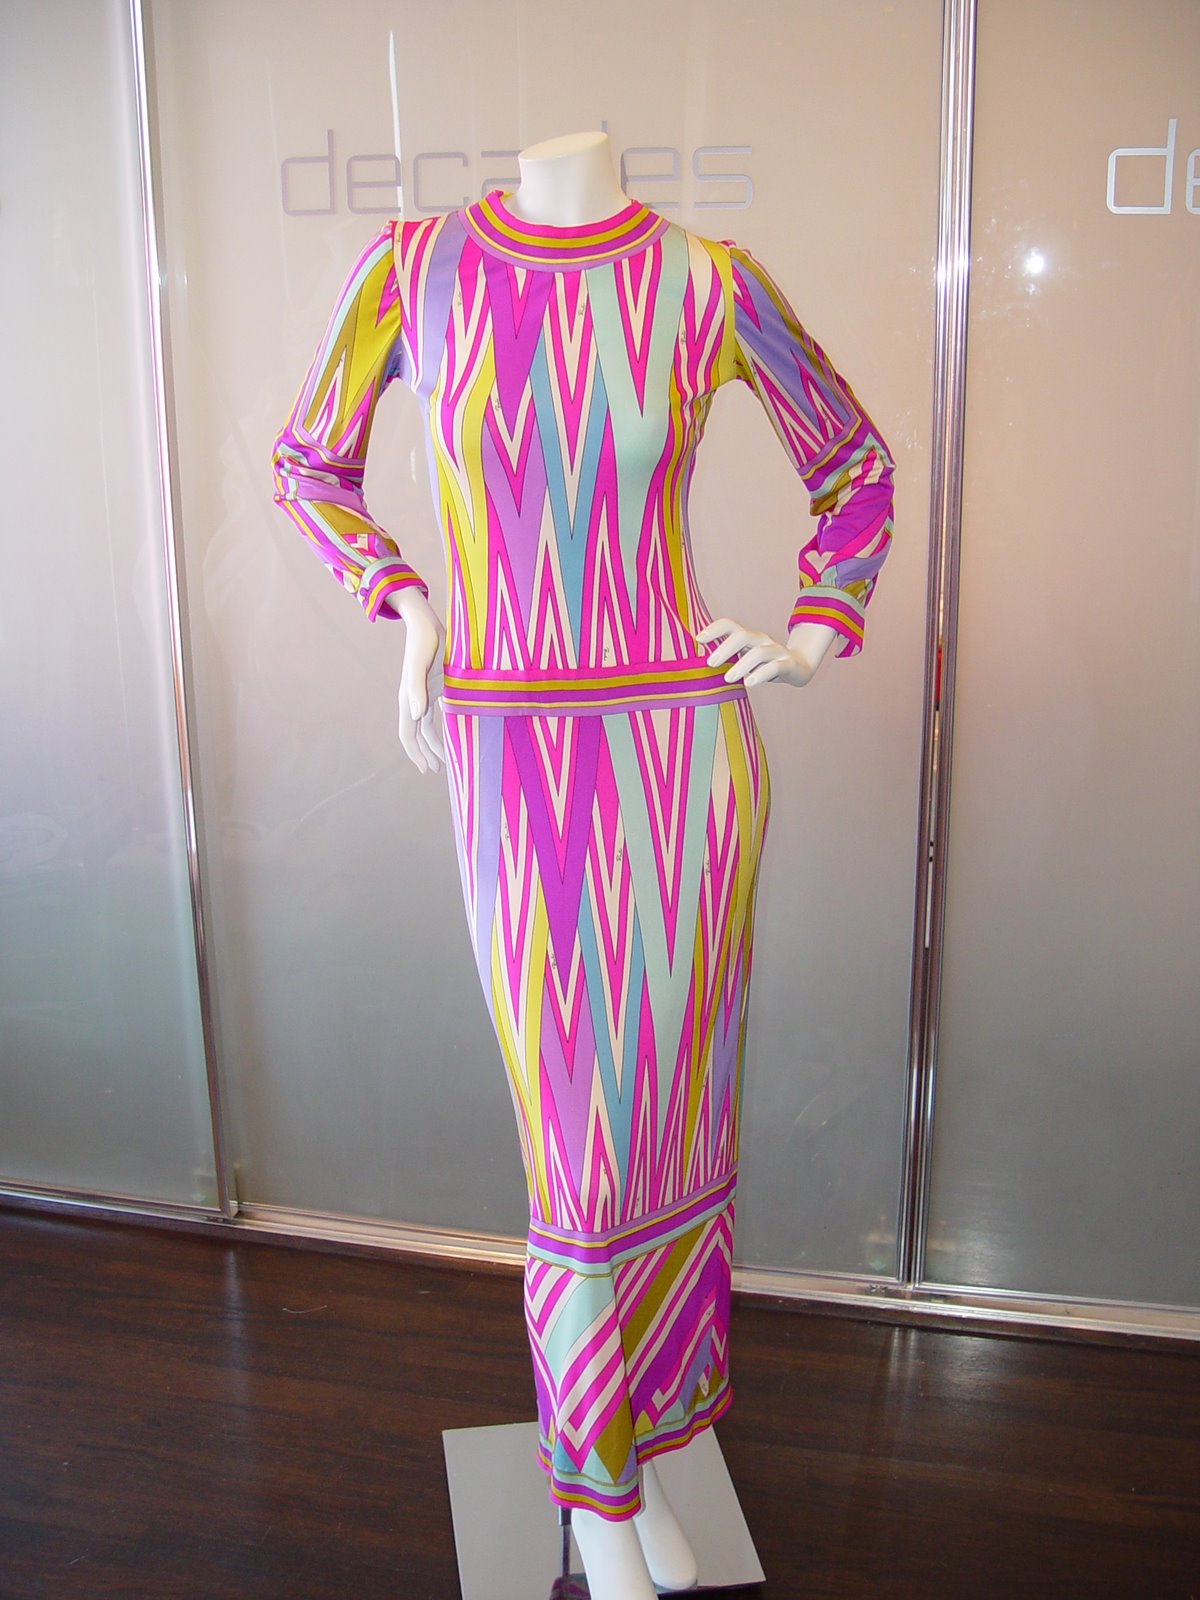 [EMILIO+PUCCI+FOR+LORD+AND+TAYLOR+ZIG+ZAG+PRINT+LONG+SLEEVE+DRESS+C+60S+MARKED+SIZE+8.JPG.JPG]